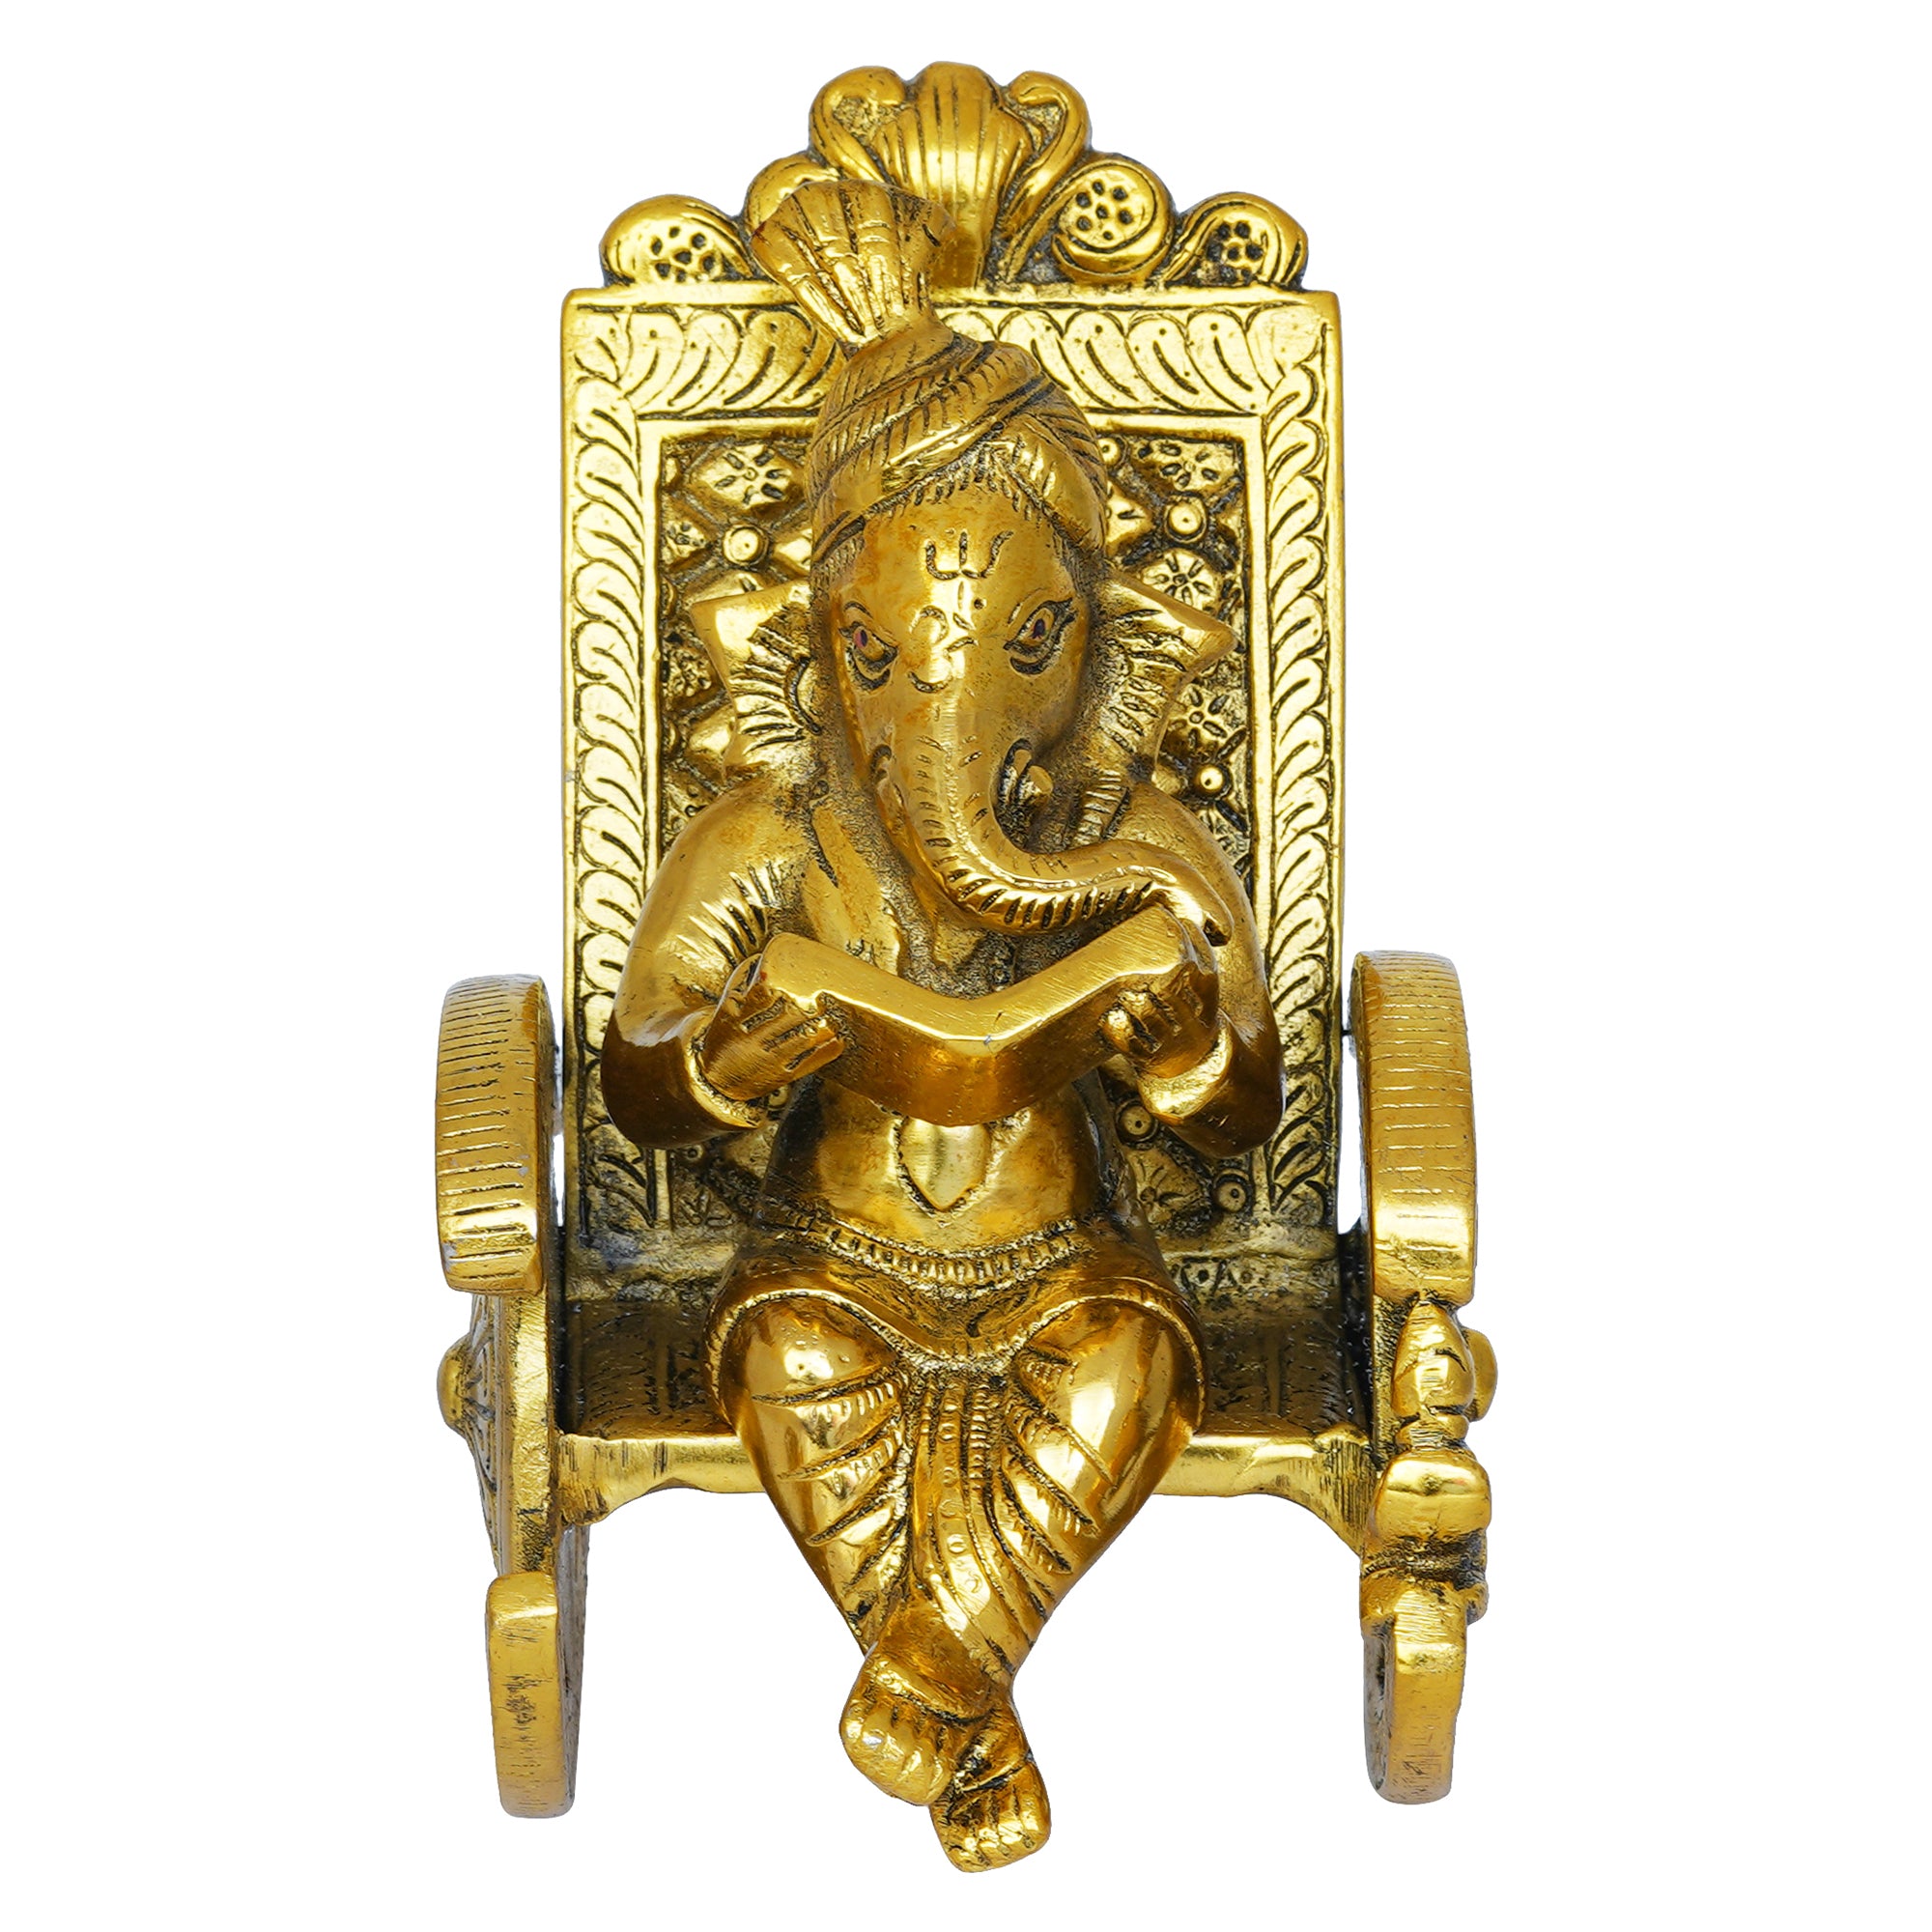 Golden Metal Handcrafted Lord Ganesha Idol Reading Book on Rocking Chair 6